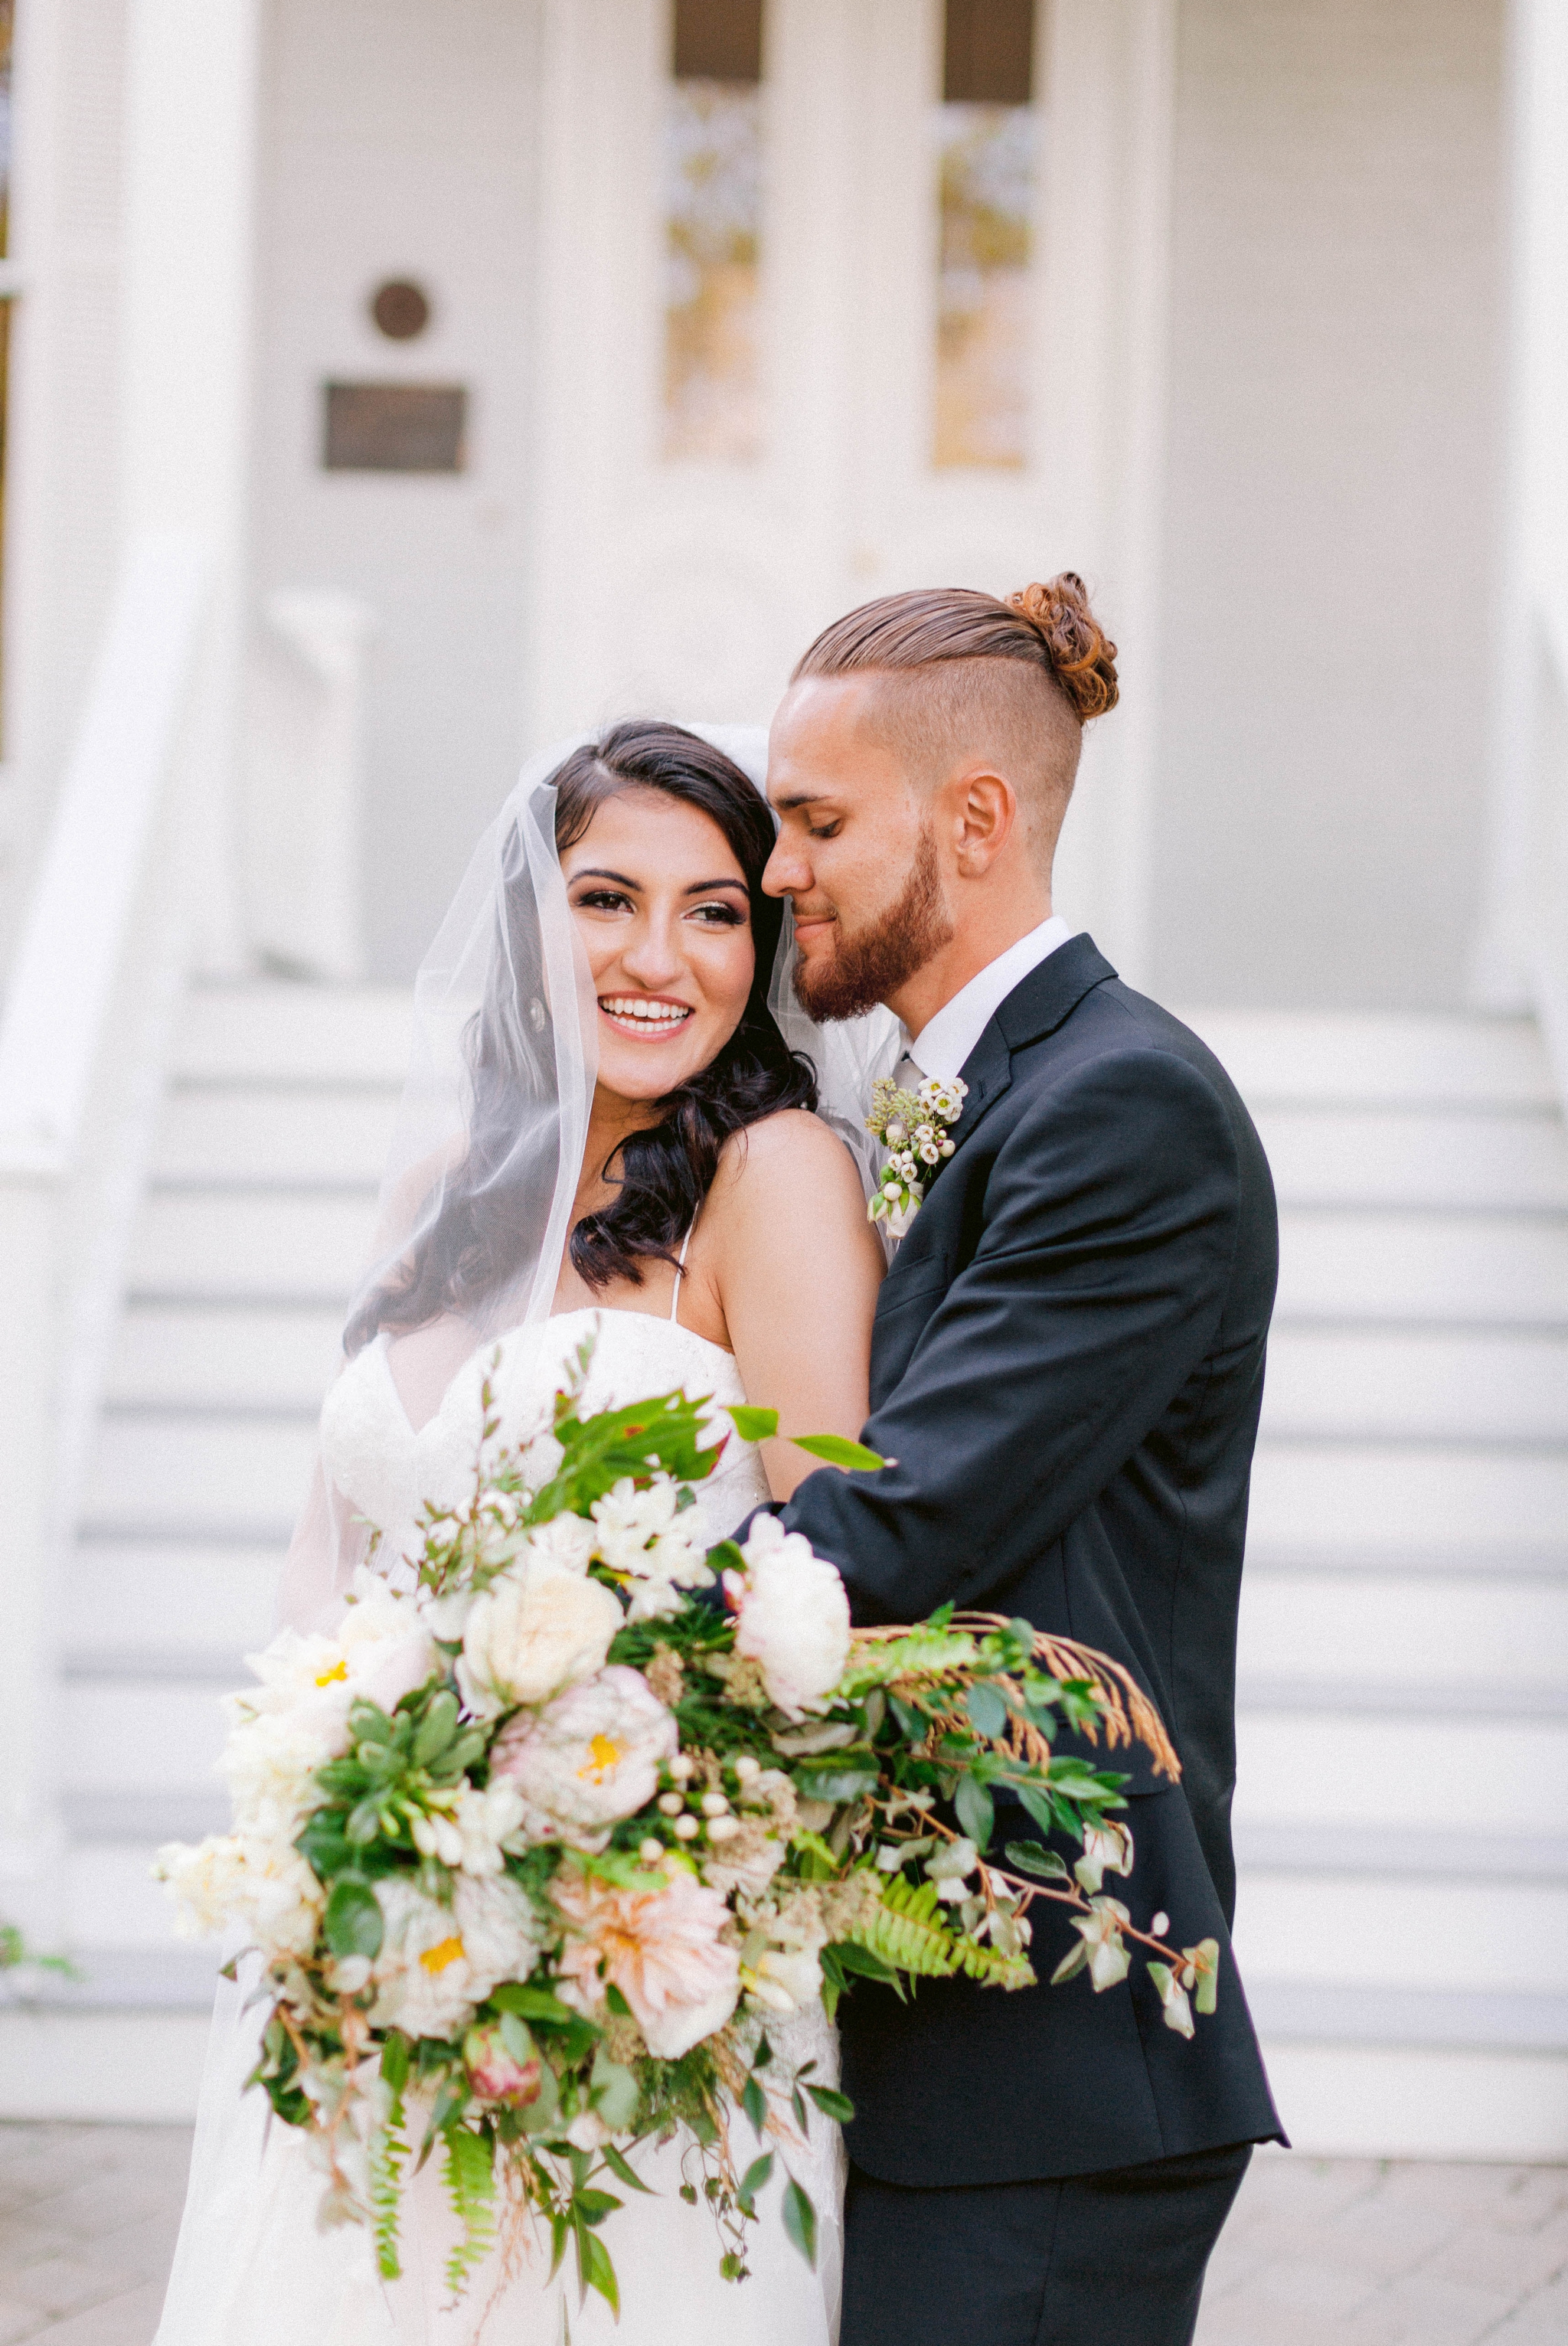  Bride and groom laughing - Wedding Portraits on the front porch of an all white luxury estate - Bride is wearing a Aline Ballgown by Cherish by Southern Bride with a long cathedral veil - Groom is wearing a black suit by Generation Tux and has a man